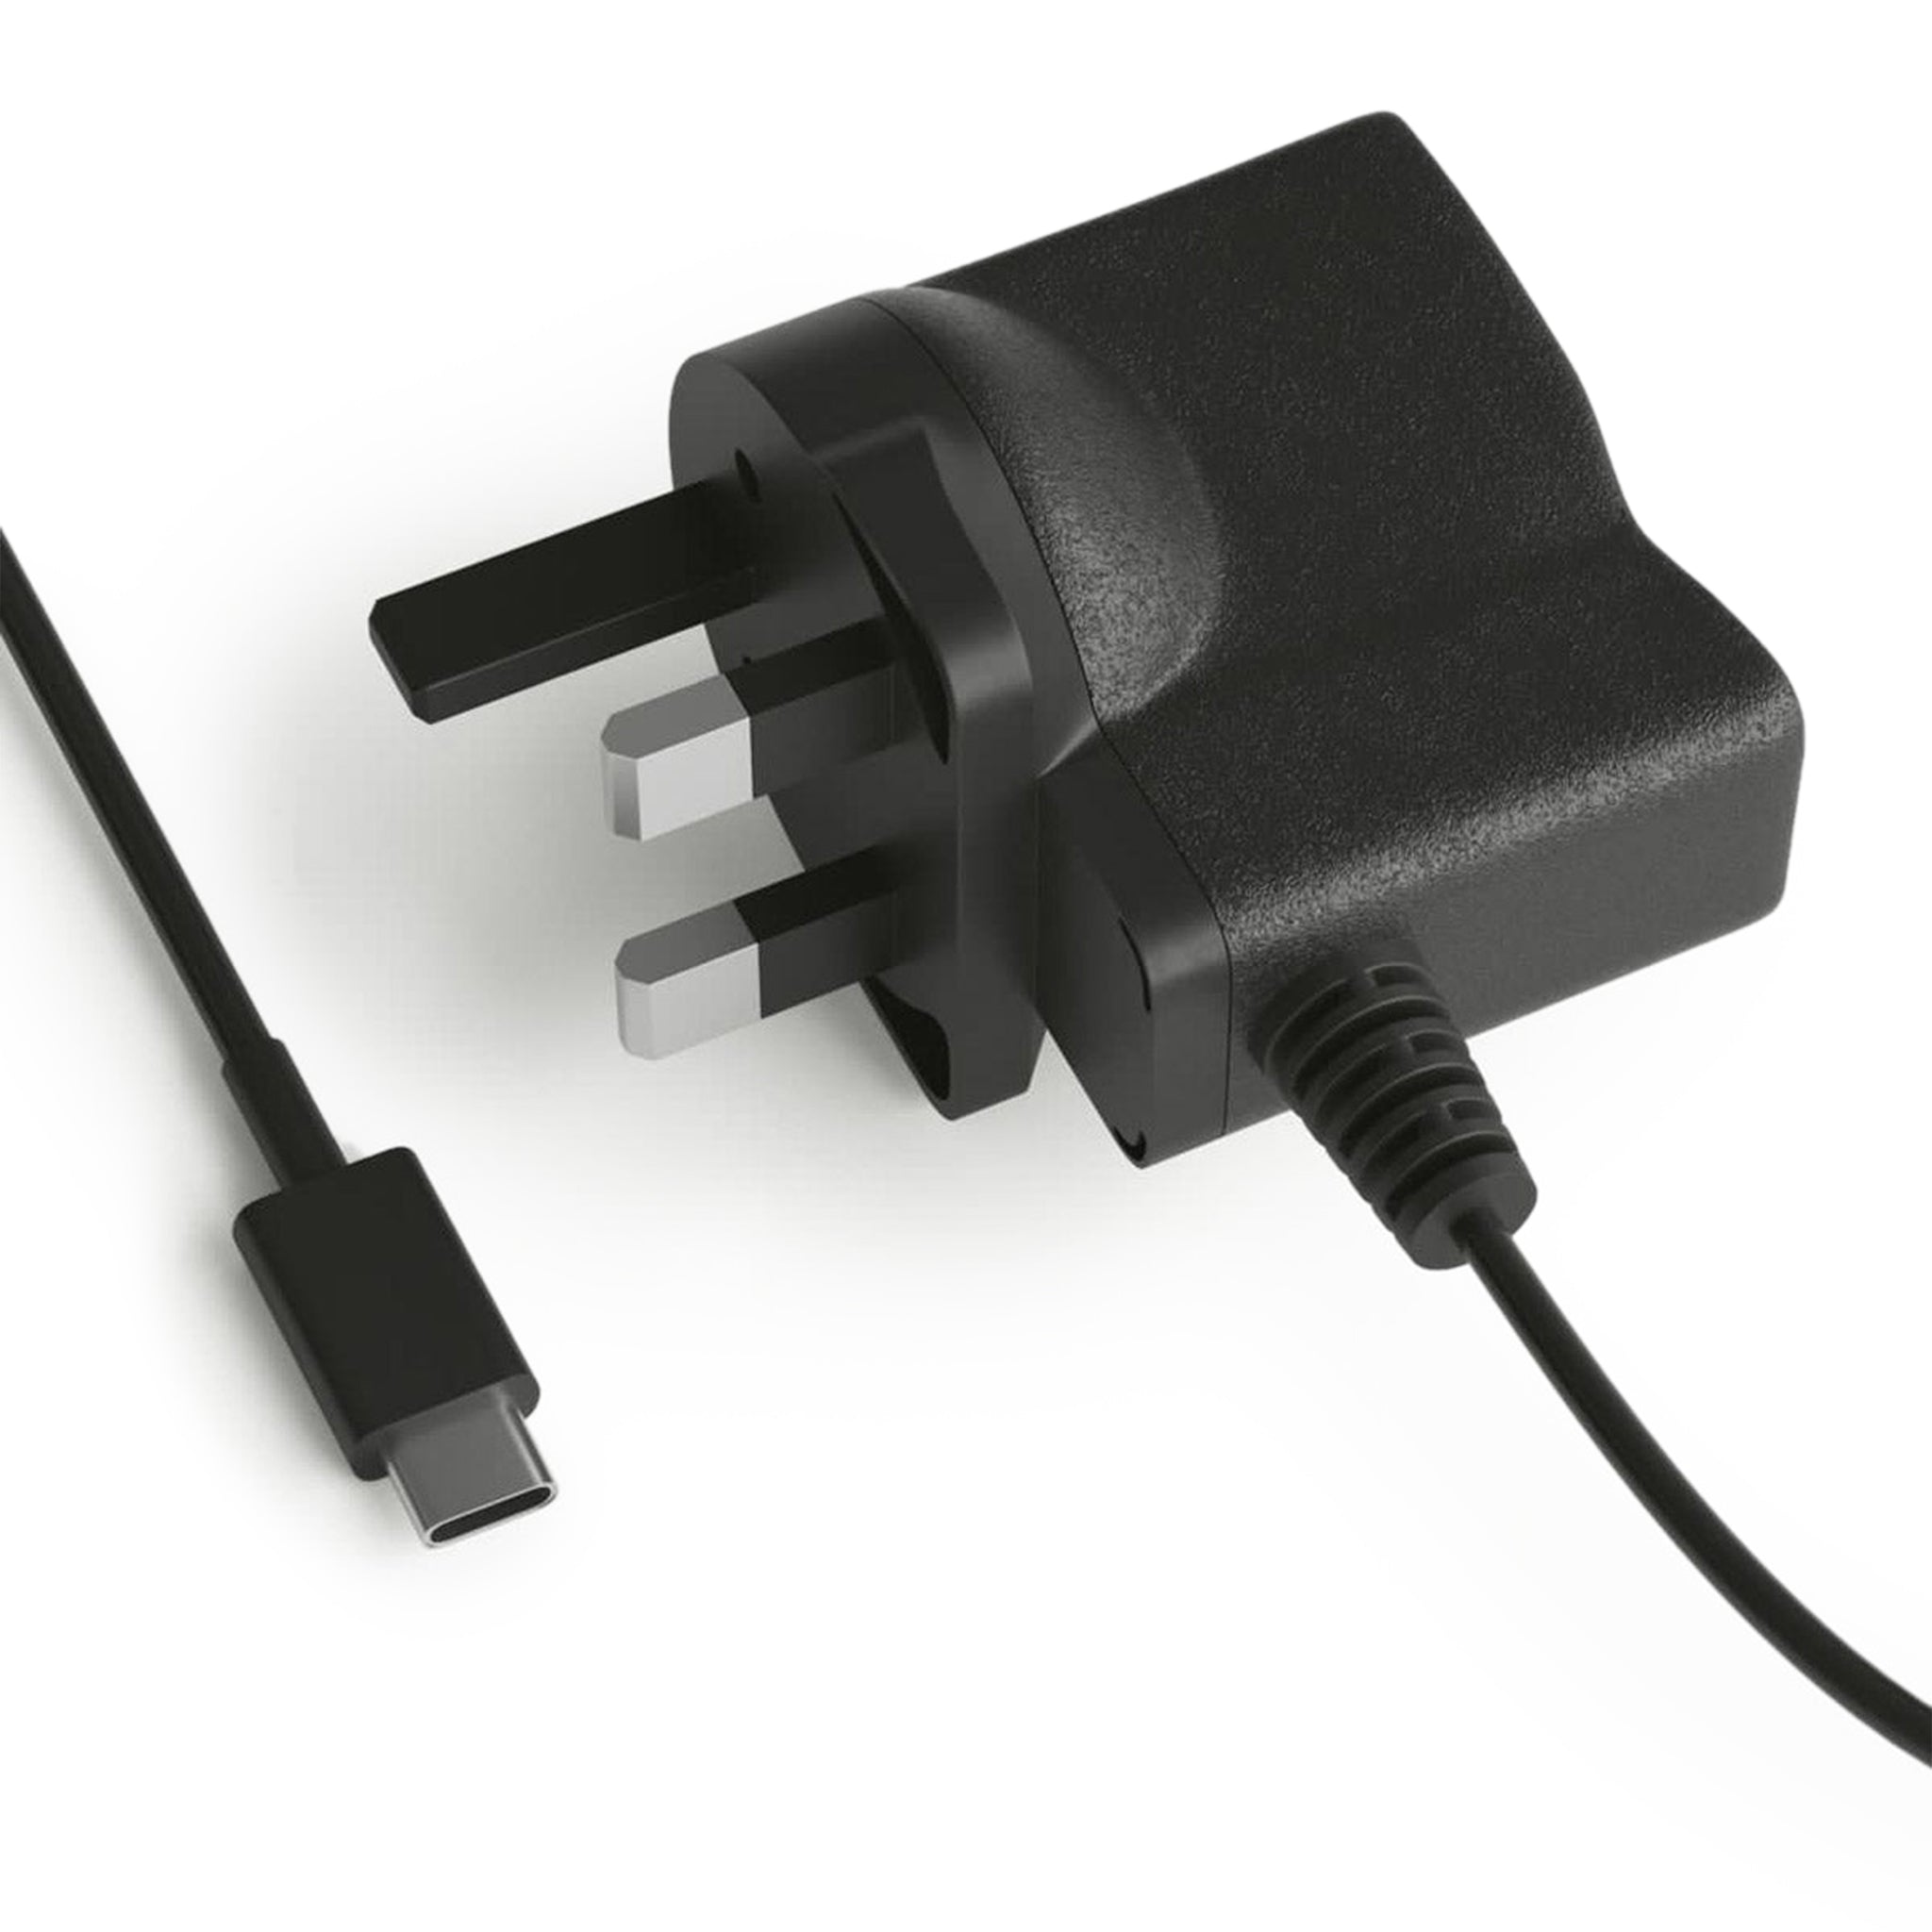 View of Sneak Spply Connect USB-C Plug 